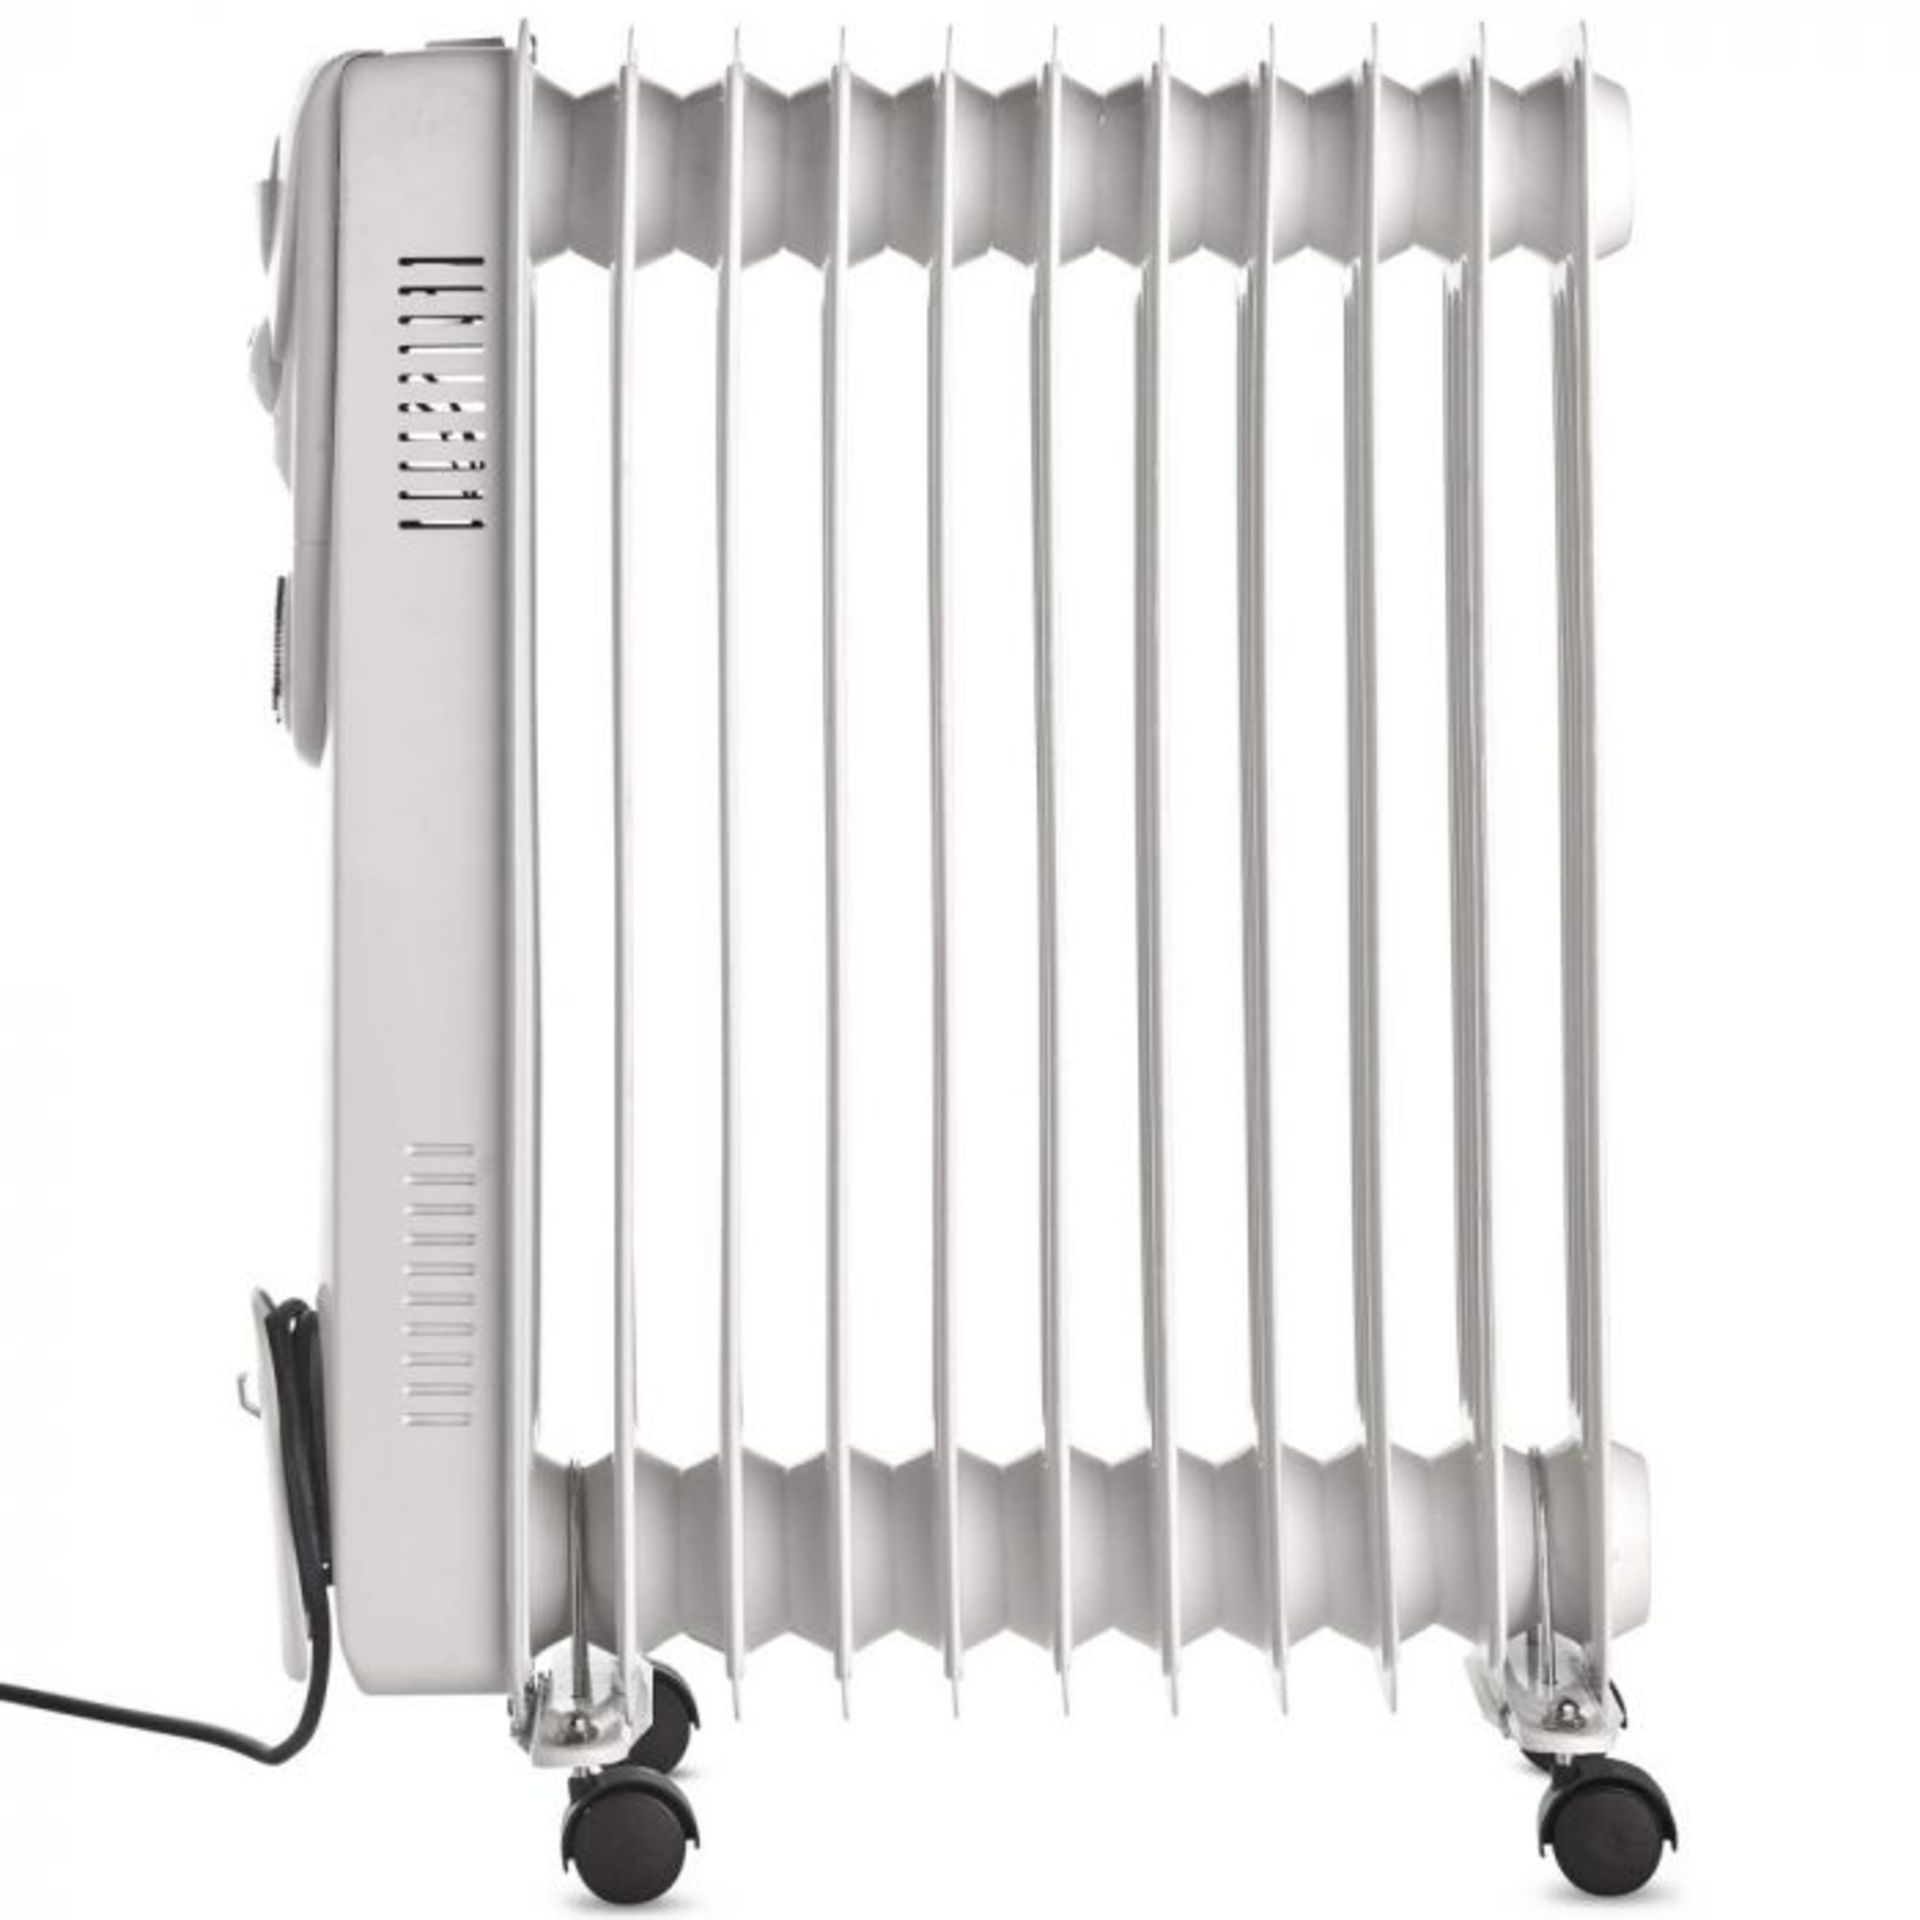 (S445) 11 Fin 2500W Oil Filled Radiator - White Suitable for areas up to 28 square metres 3 p... - Image 4 of 4